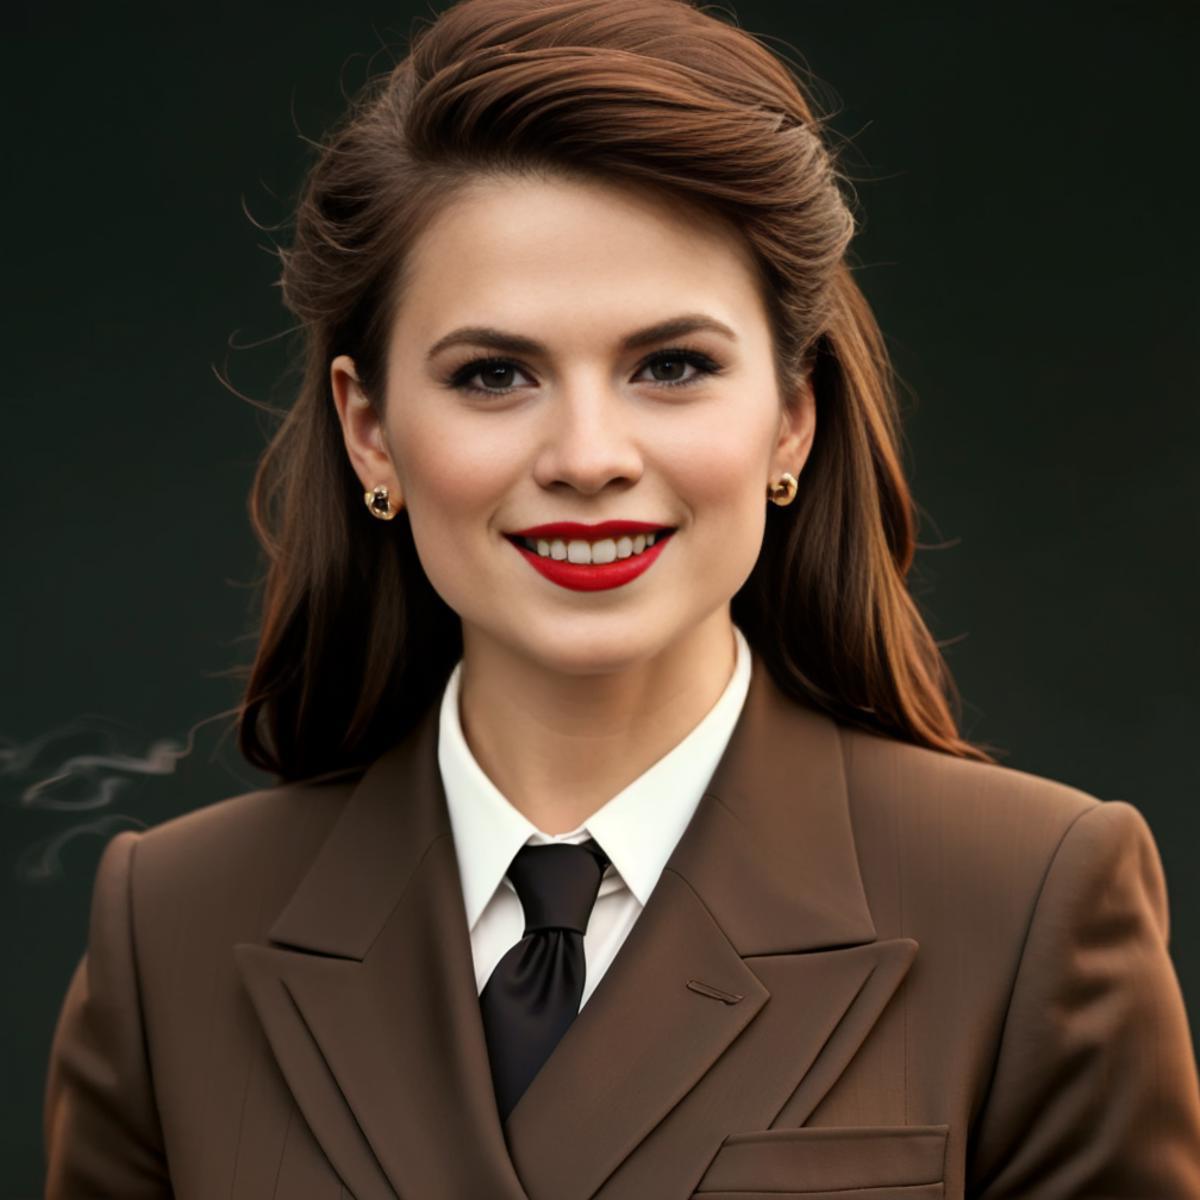 Hayley Atwell image by DMphotoart